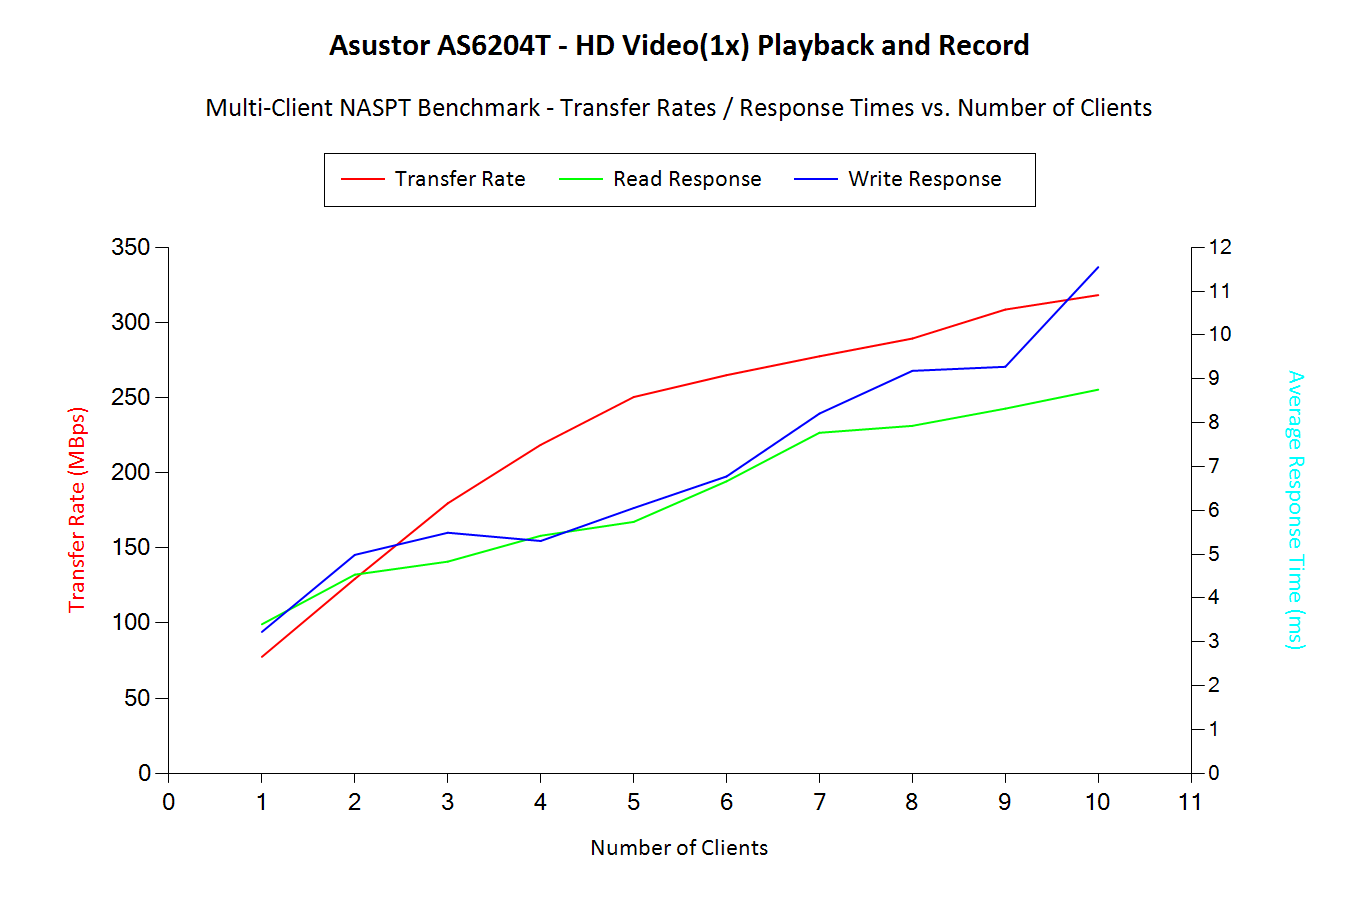 HD Video(1x) Playback and Record - Multi-Client Benchmark